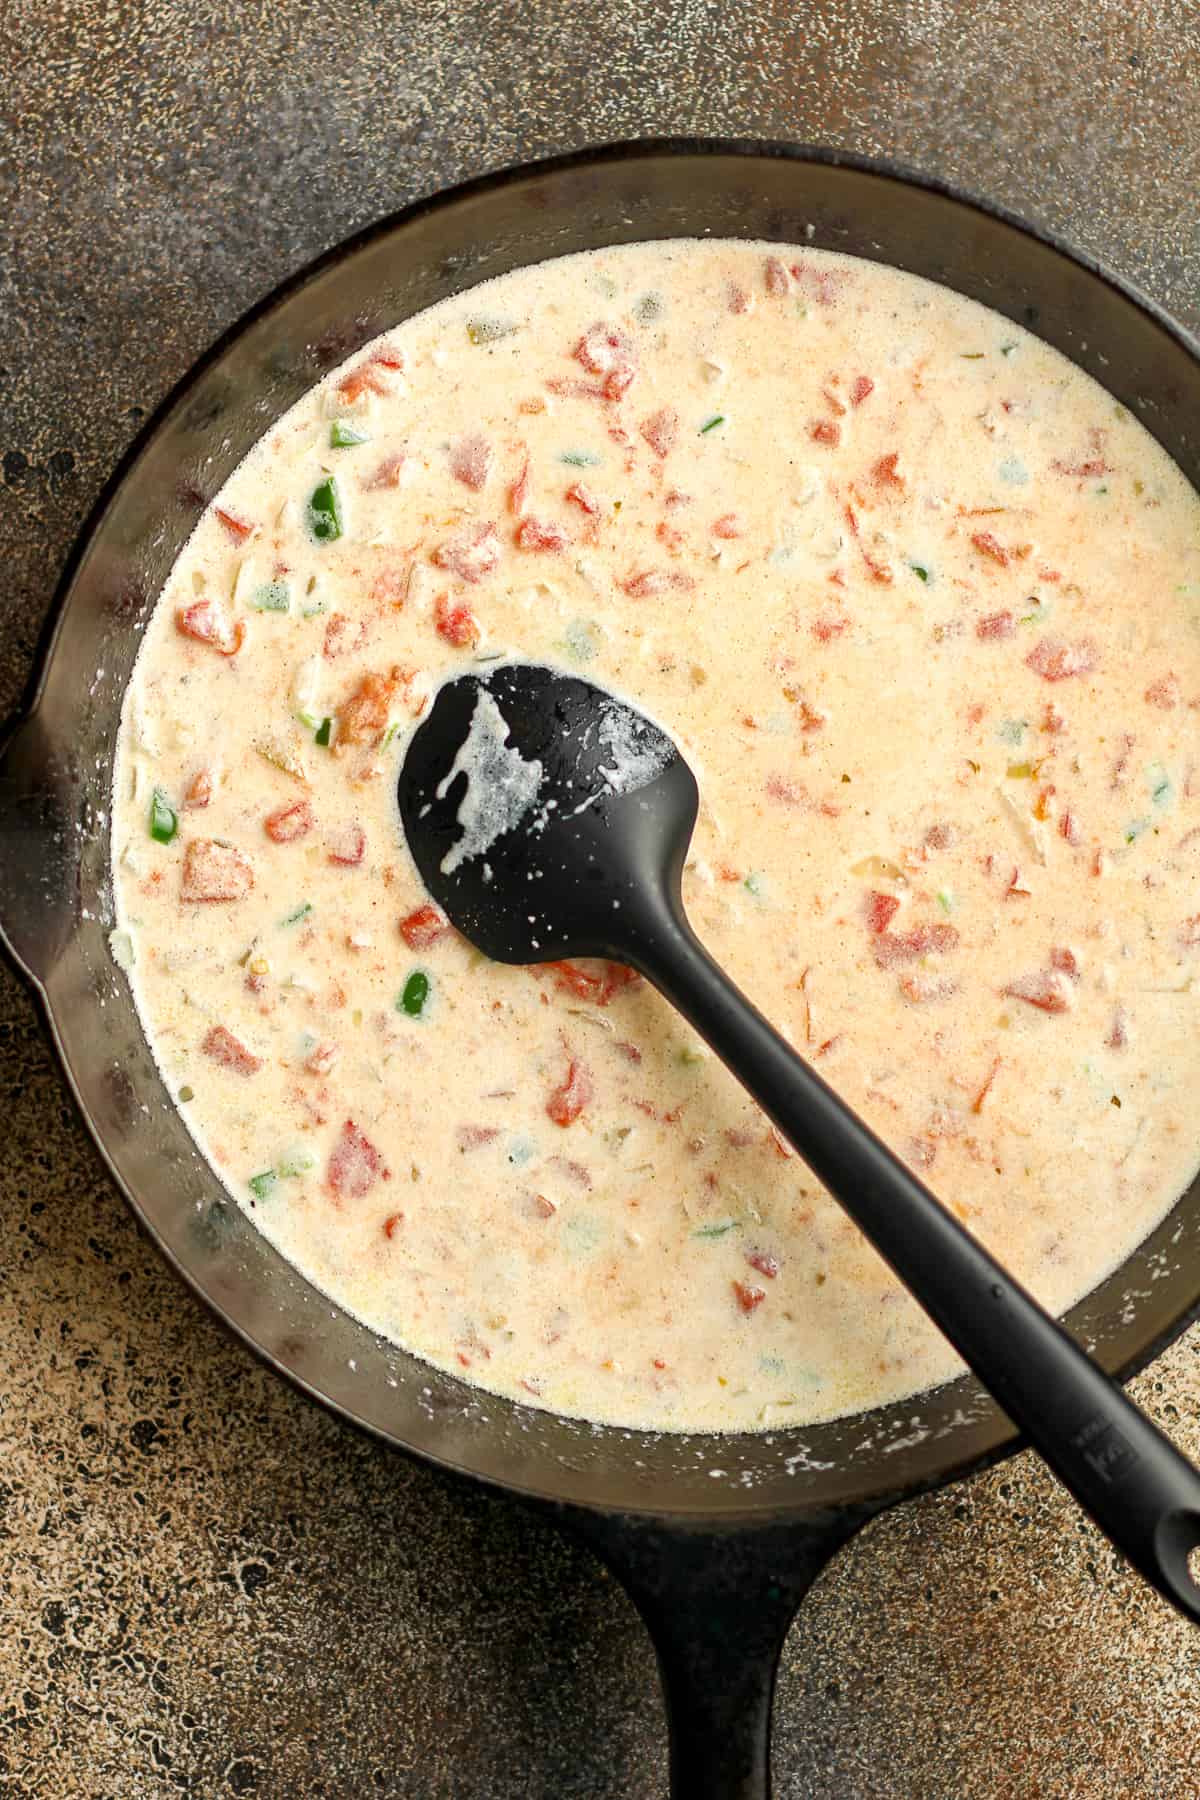 A skillet of the liquid queso before adding the cheese.